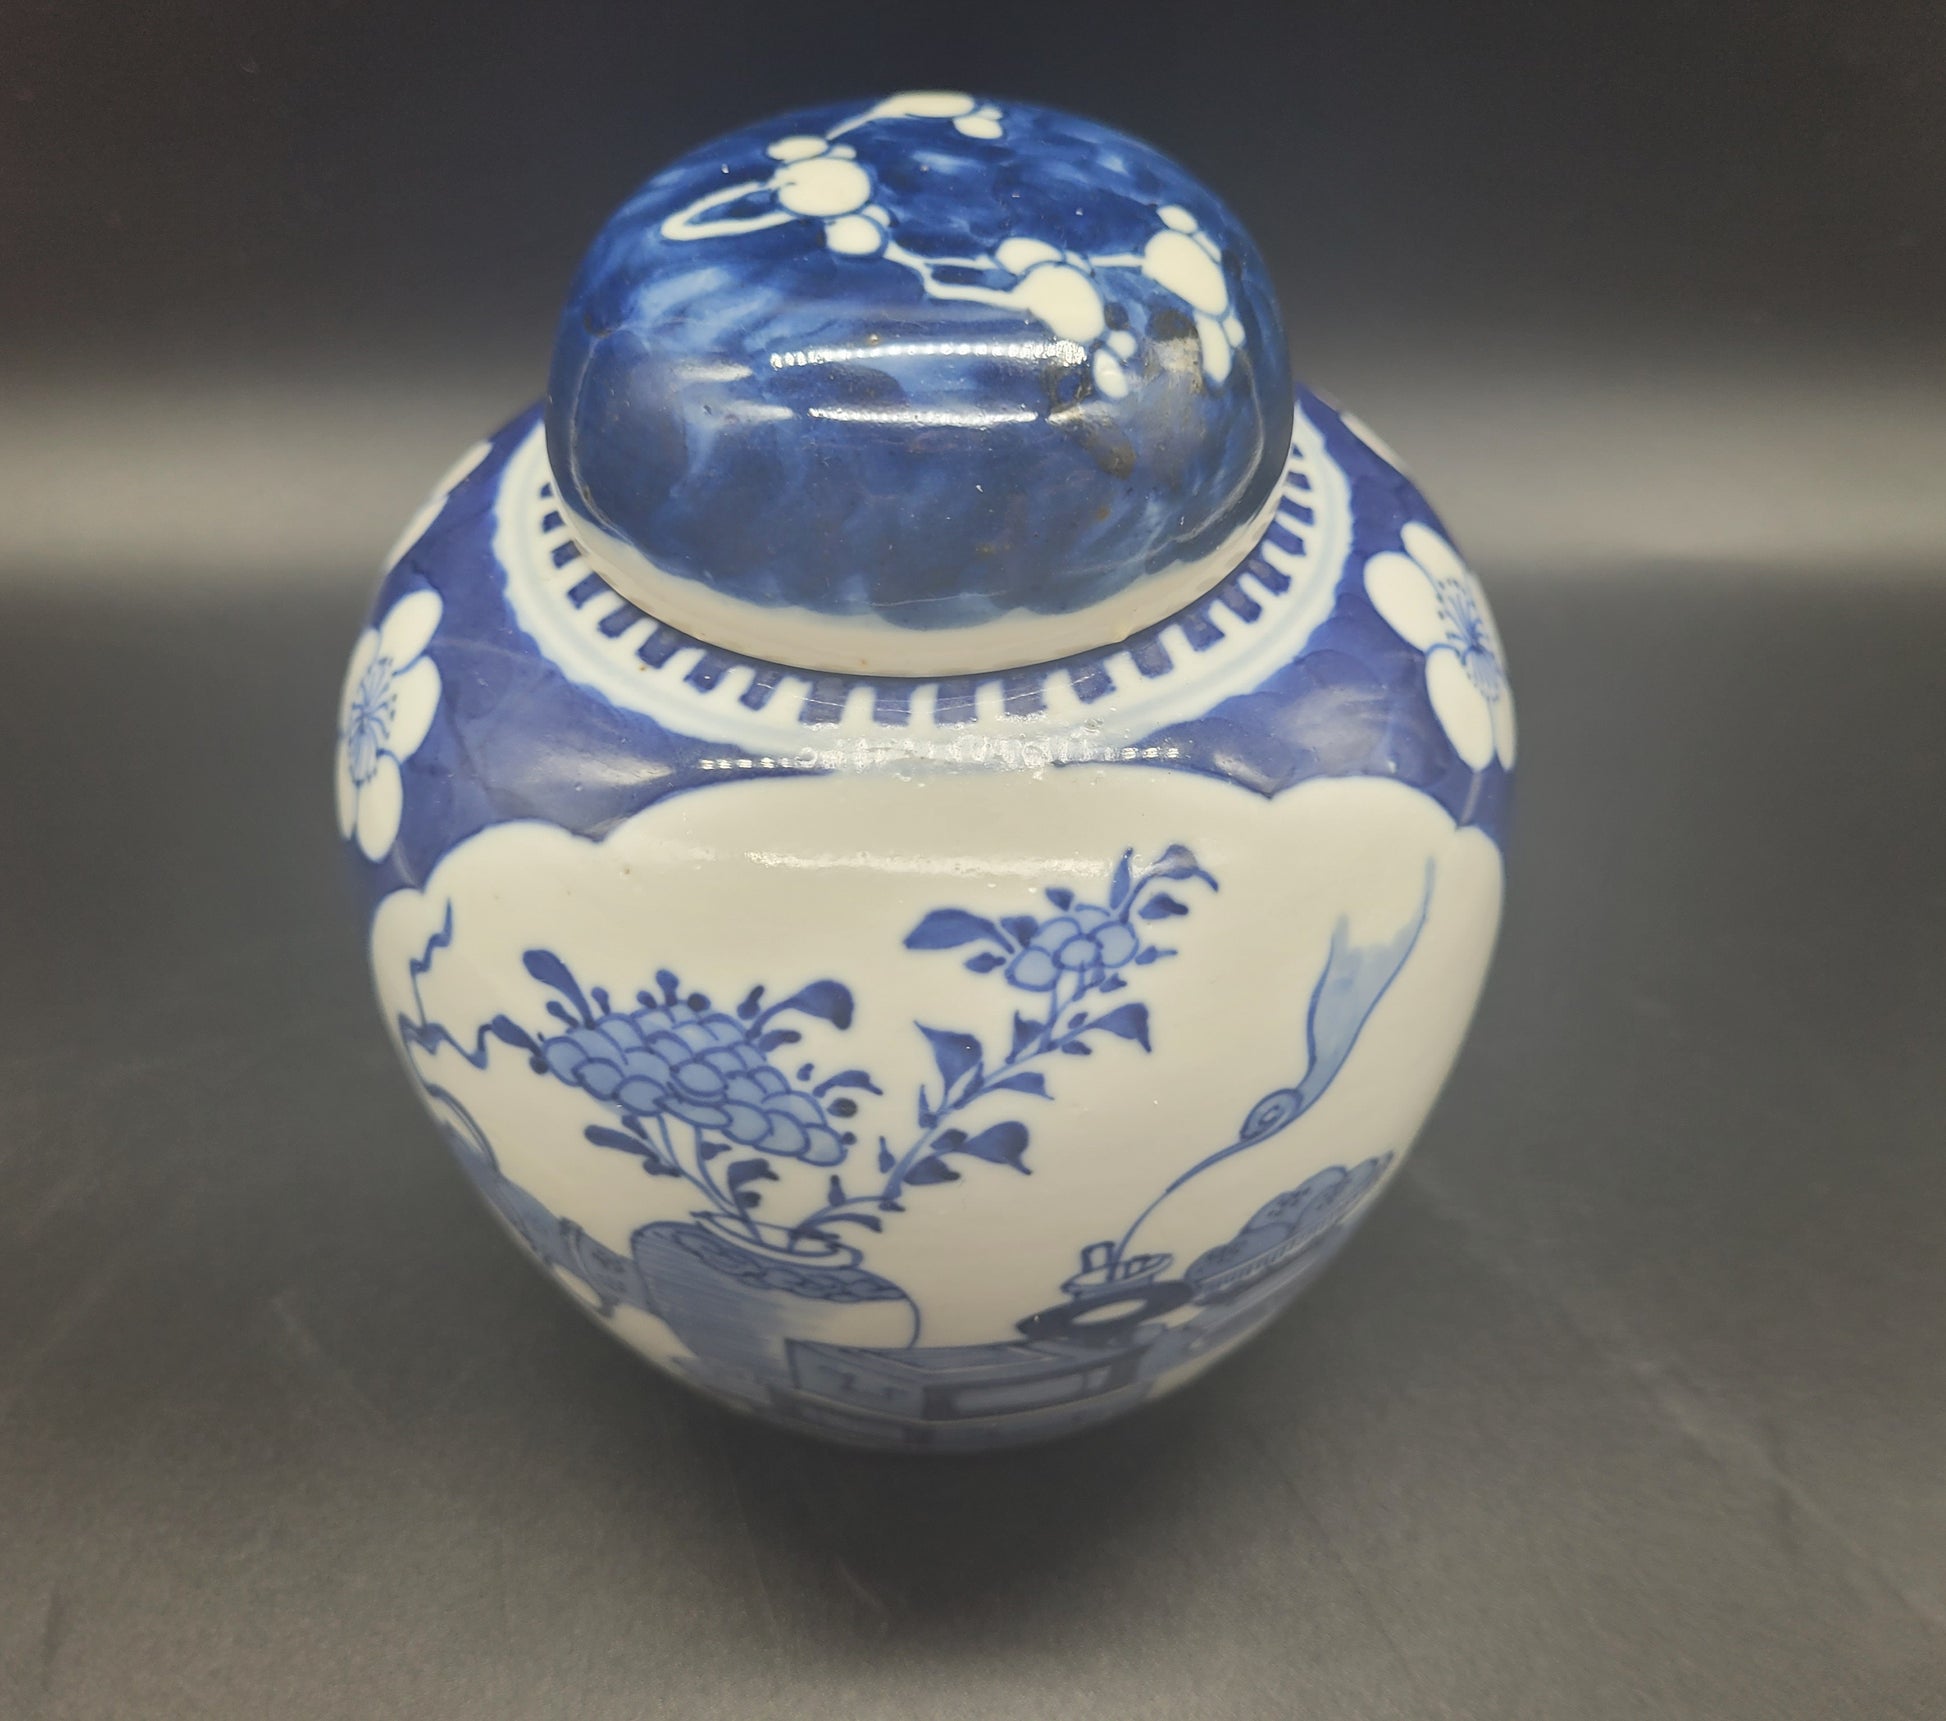 ANTIQUES ONLINE Hand Painted Chinese 19th Century Ginger Jar & Lid Decorated in the Prunus Precious Objects Pattern 4 Character Mark 